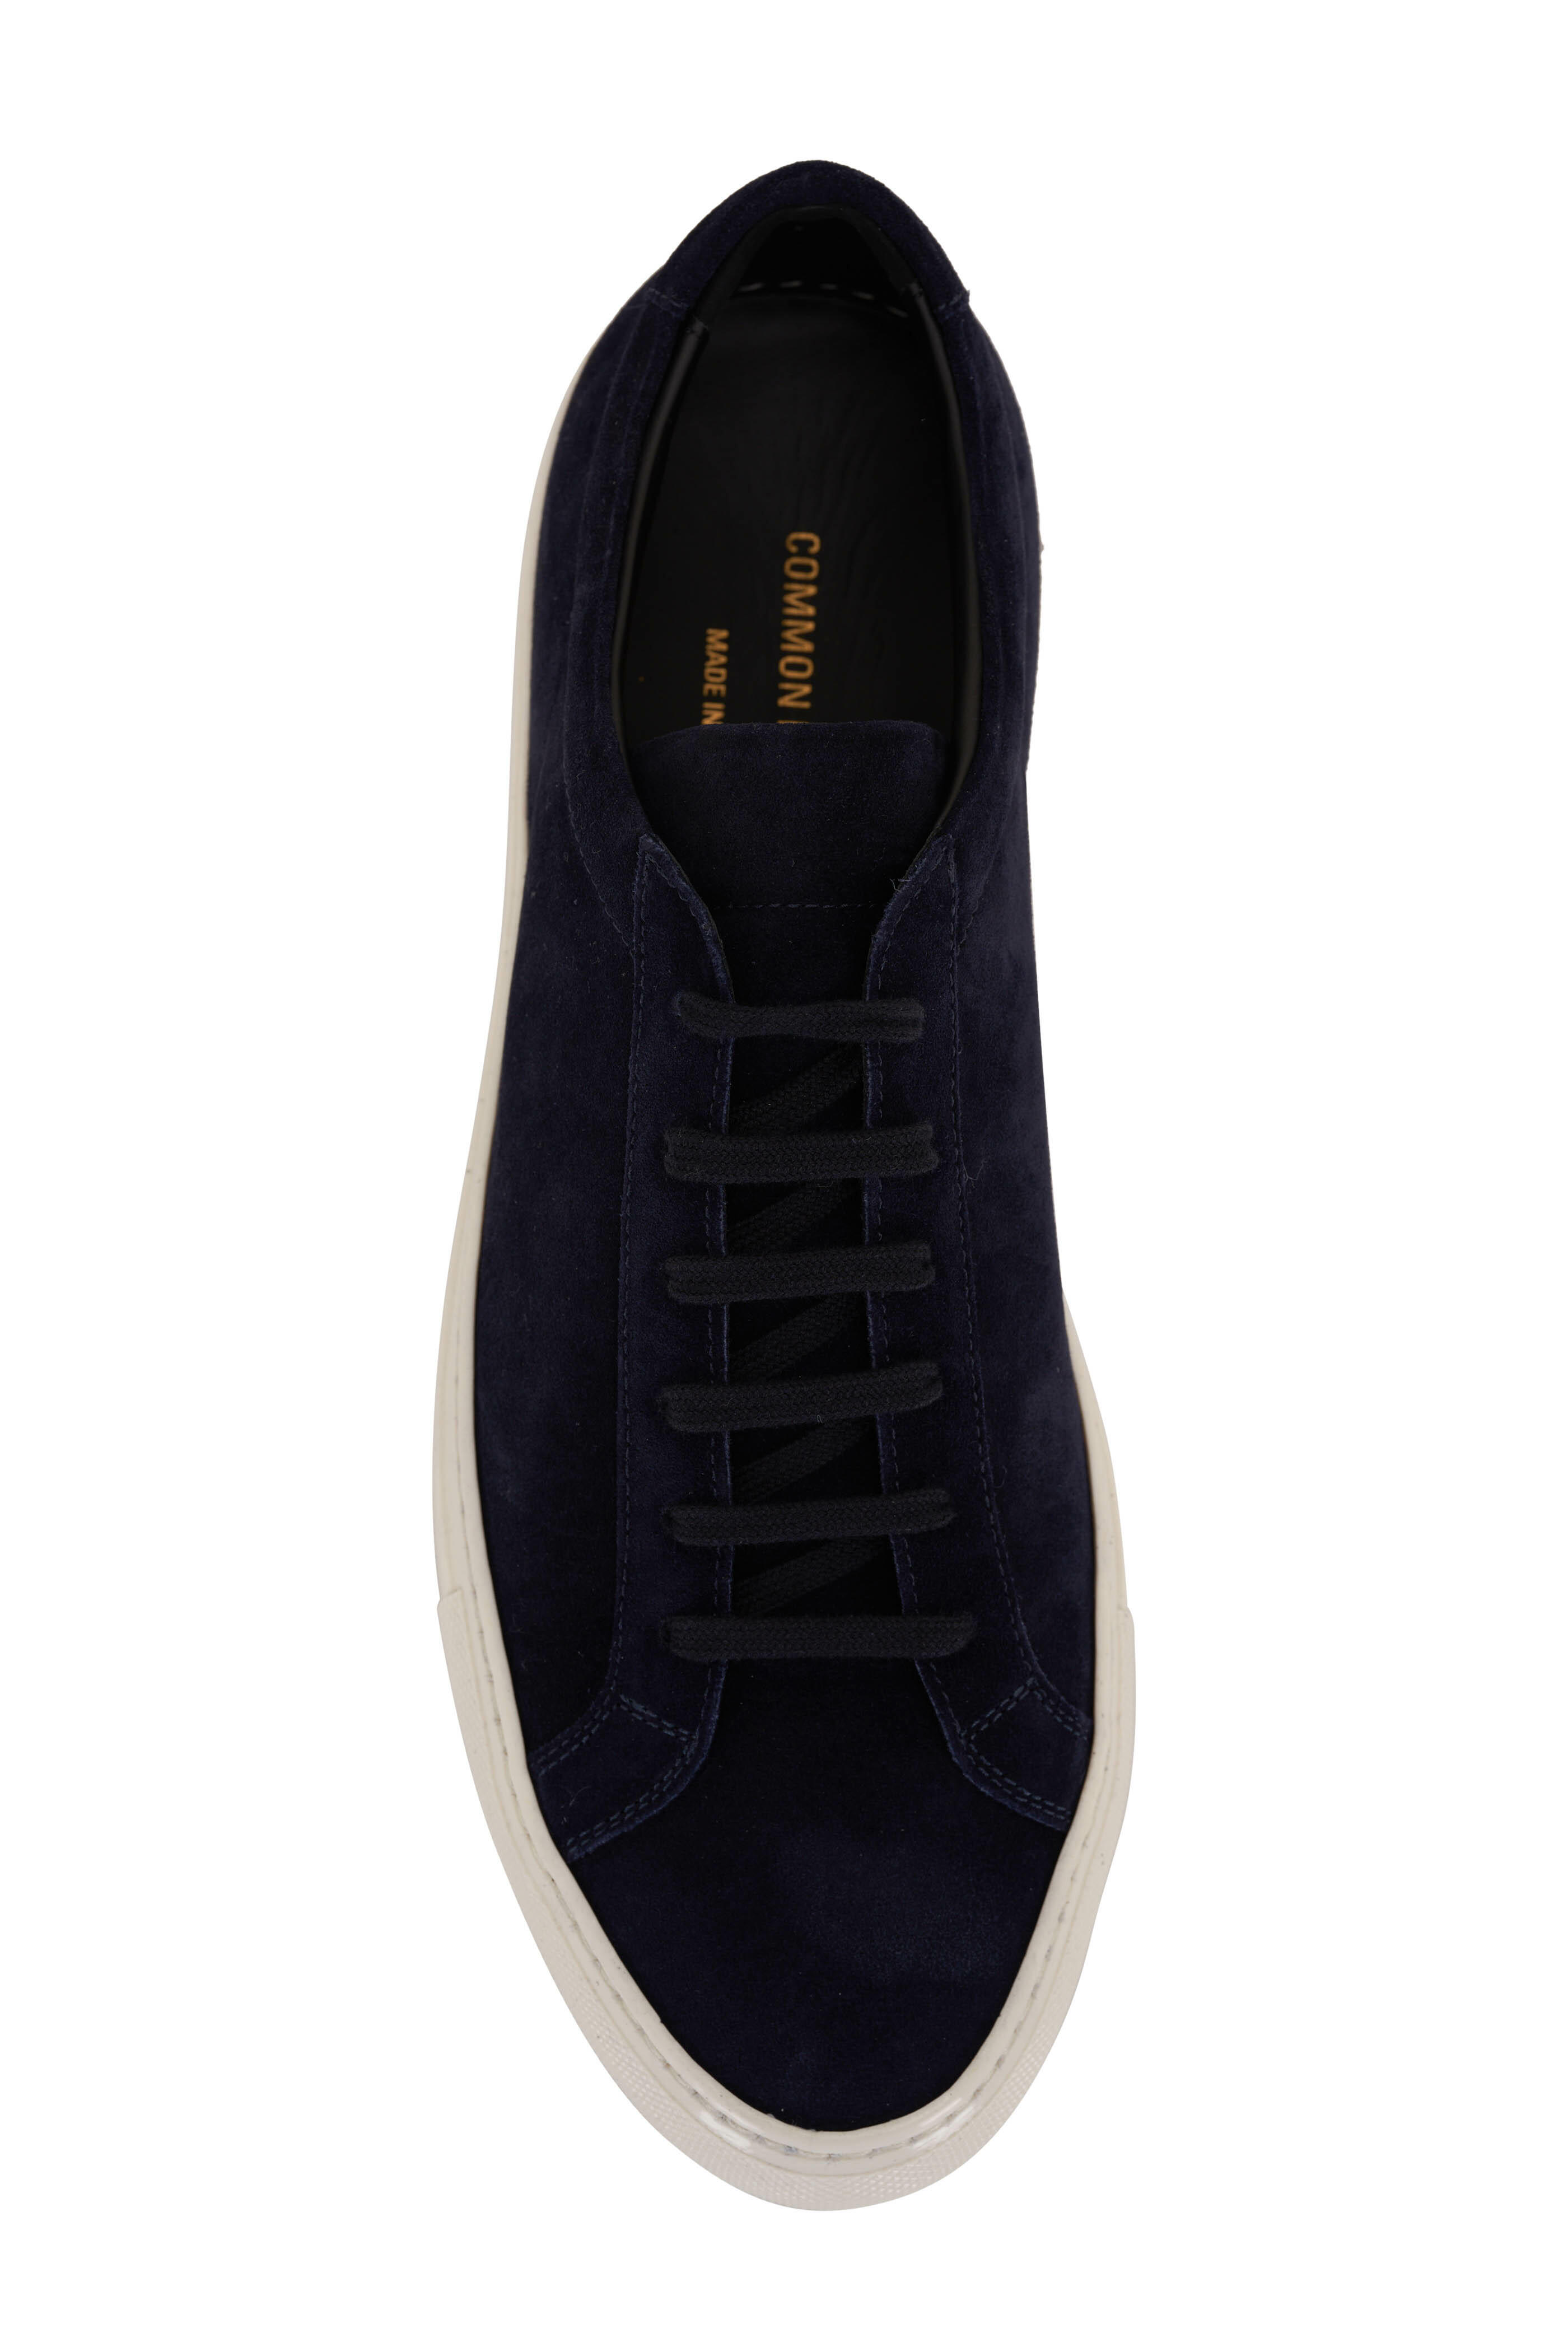 Common Projects - Achilles Navy Waxed Suede Low Top Sneaker